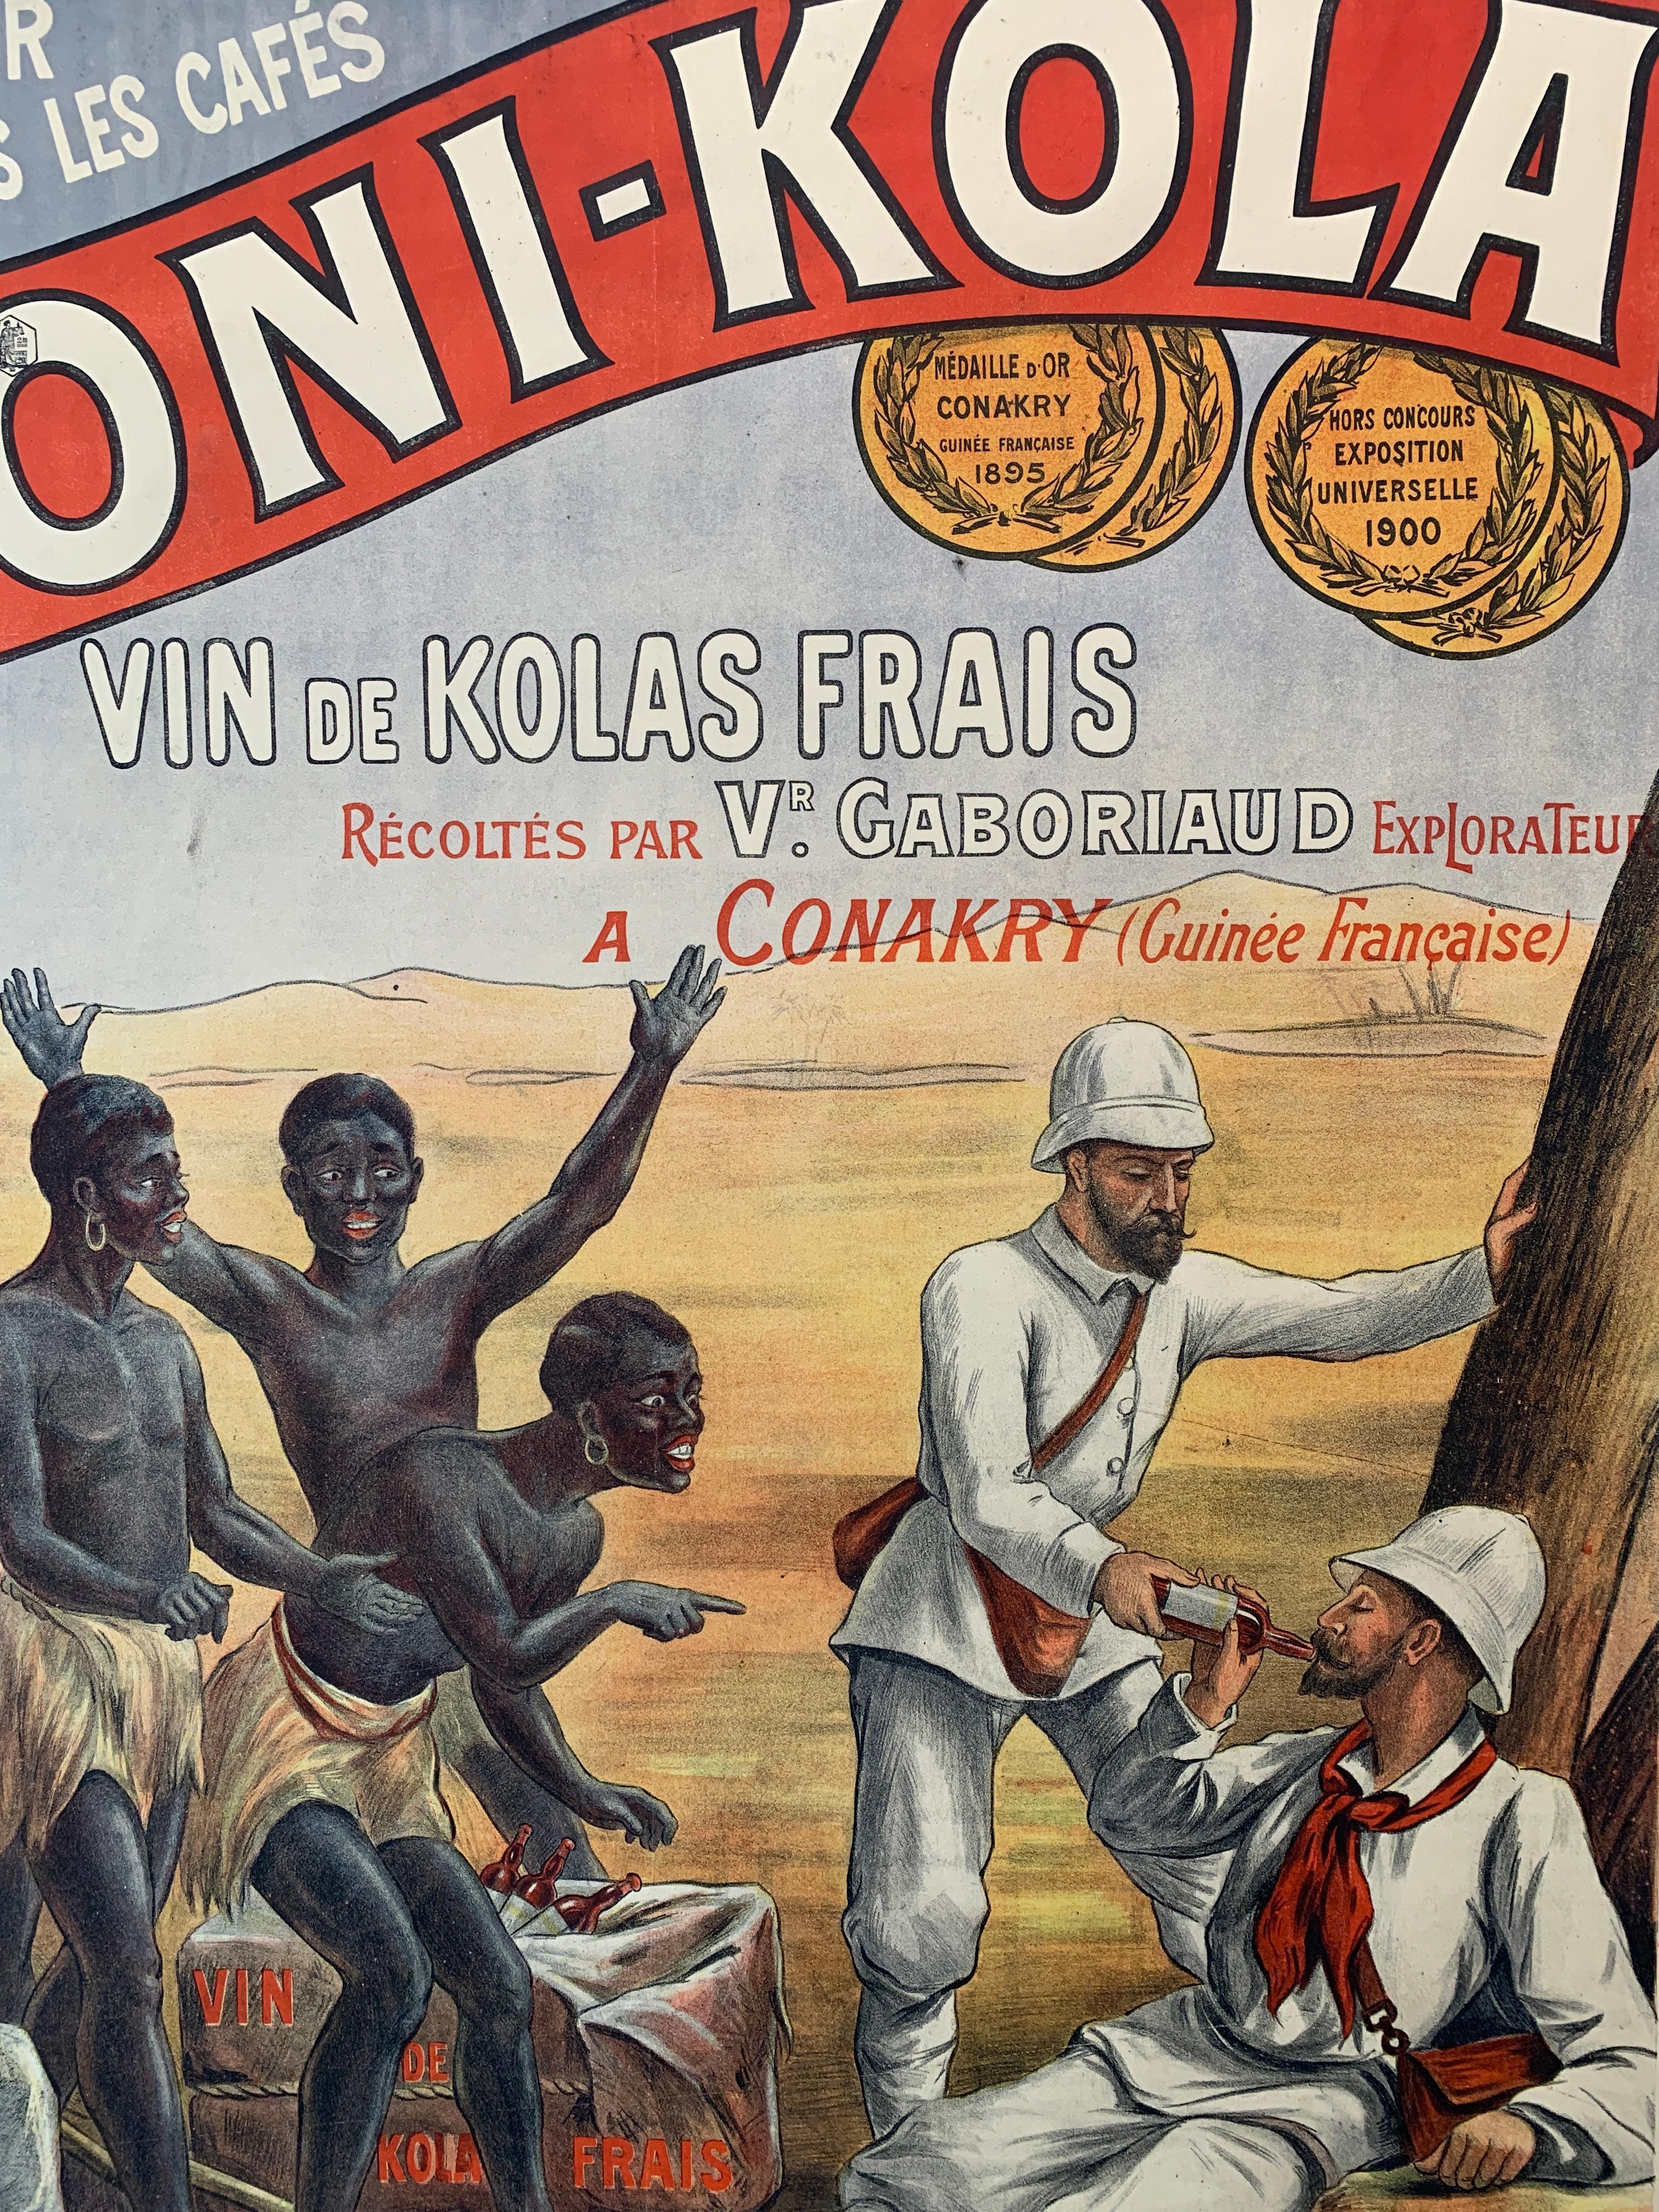 'Toni-Kola', Original Vintage Early 19th Century Colonial Propaganda Poster

Toni-Kola, a colour lithographic poster from 1900; this poster is showing the influence of colonial iconography linked to colonial propaganda and the representation of